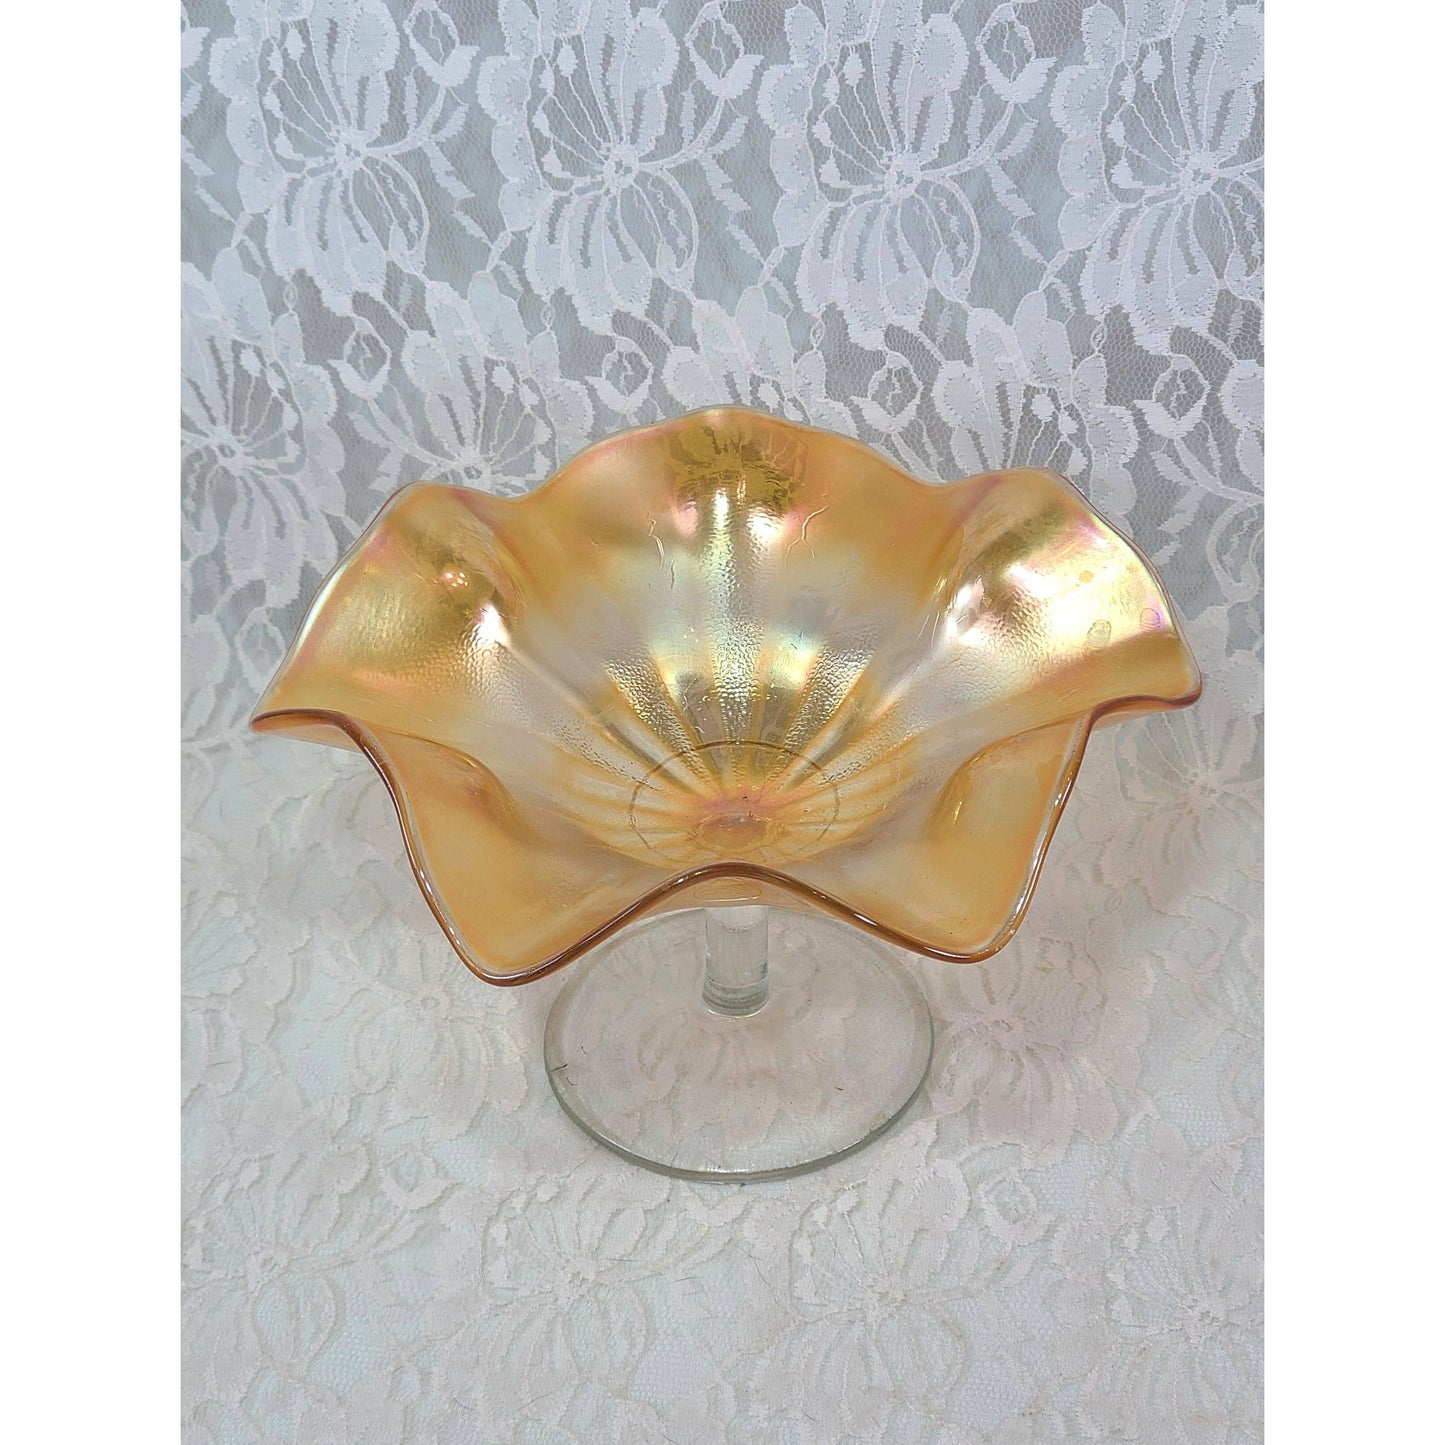 Carnival Style Orange Amber Marigold Compote Bowl ~ Fluted Glass on Pedestal ~ Candy Dish ~ Crystal Display